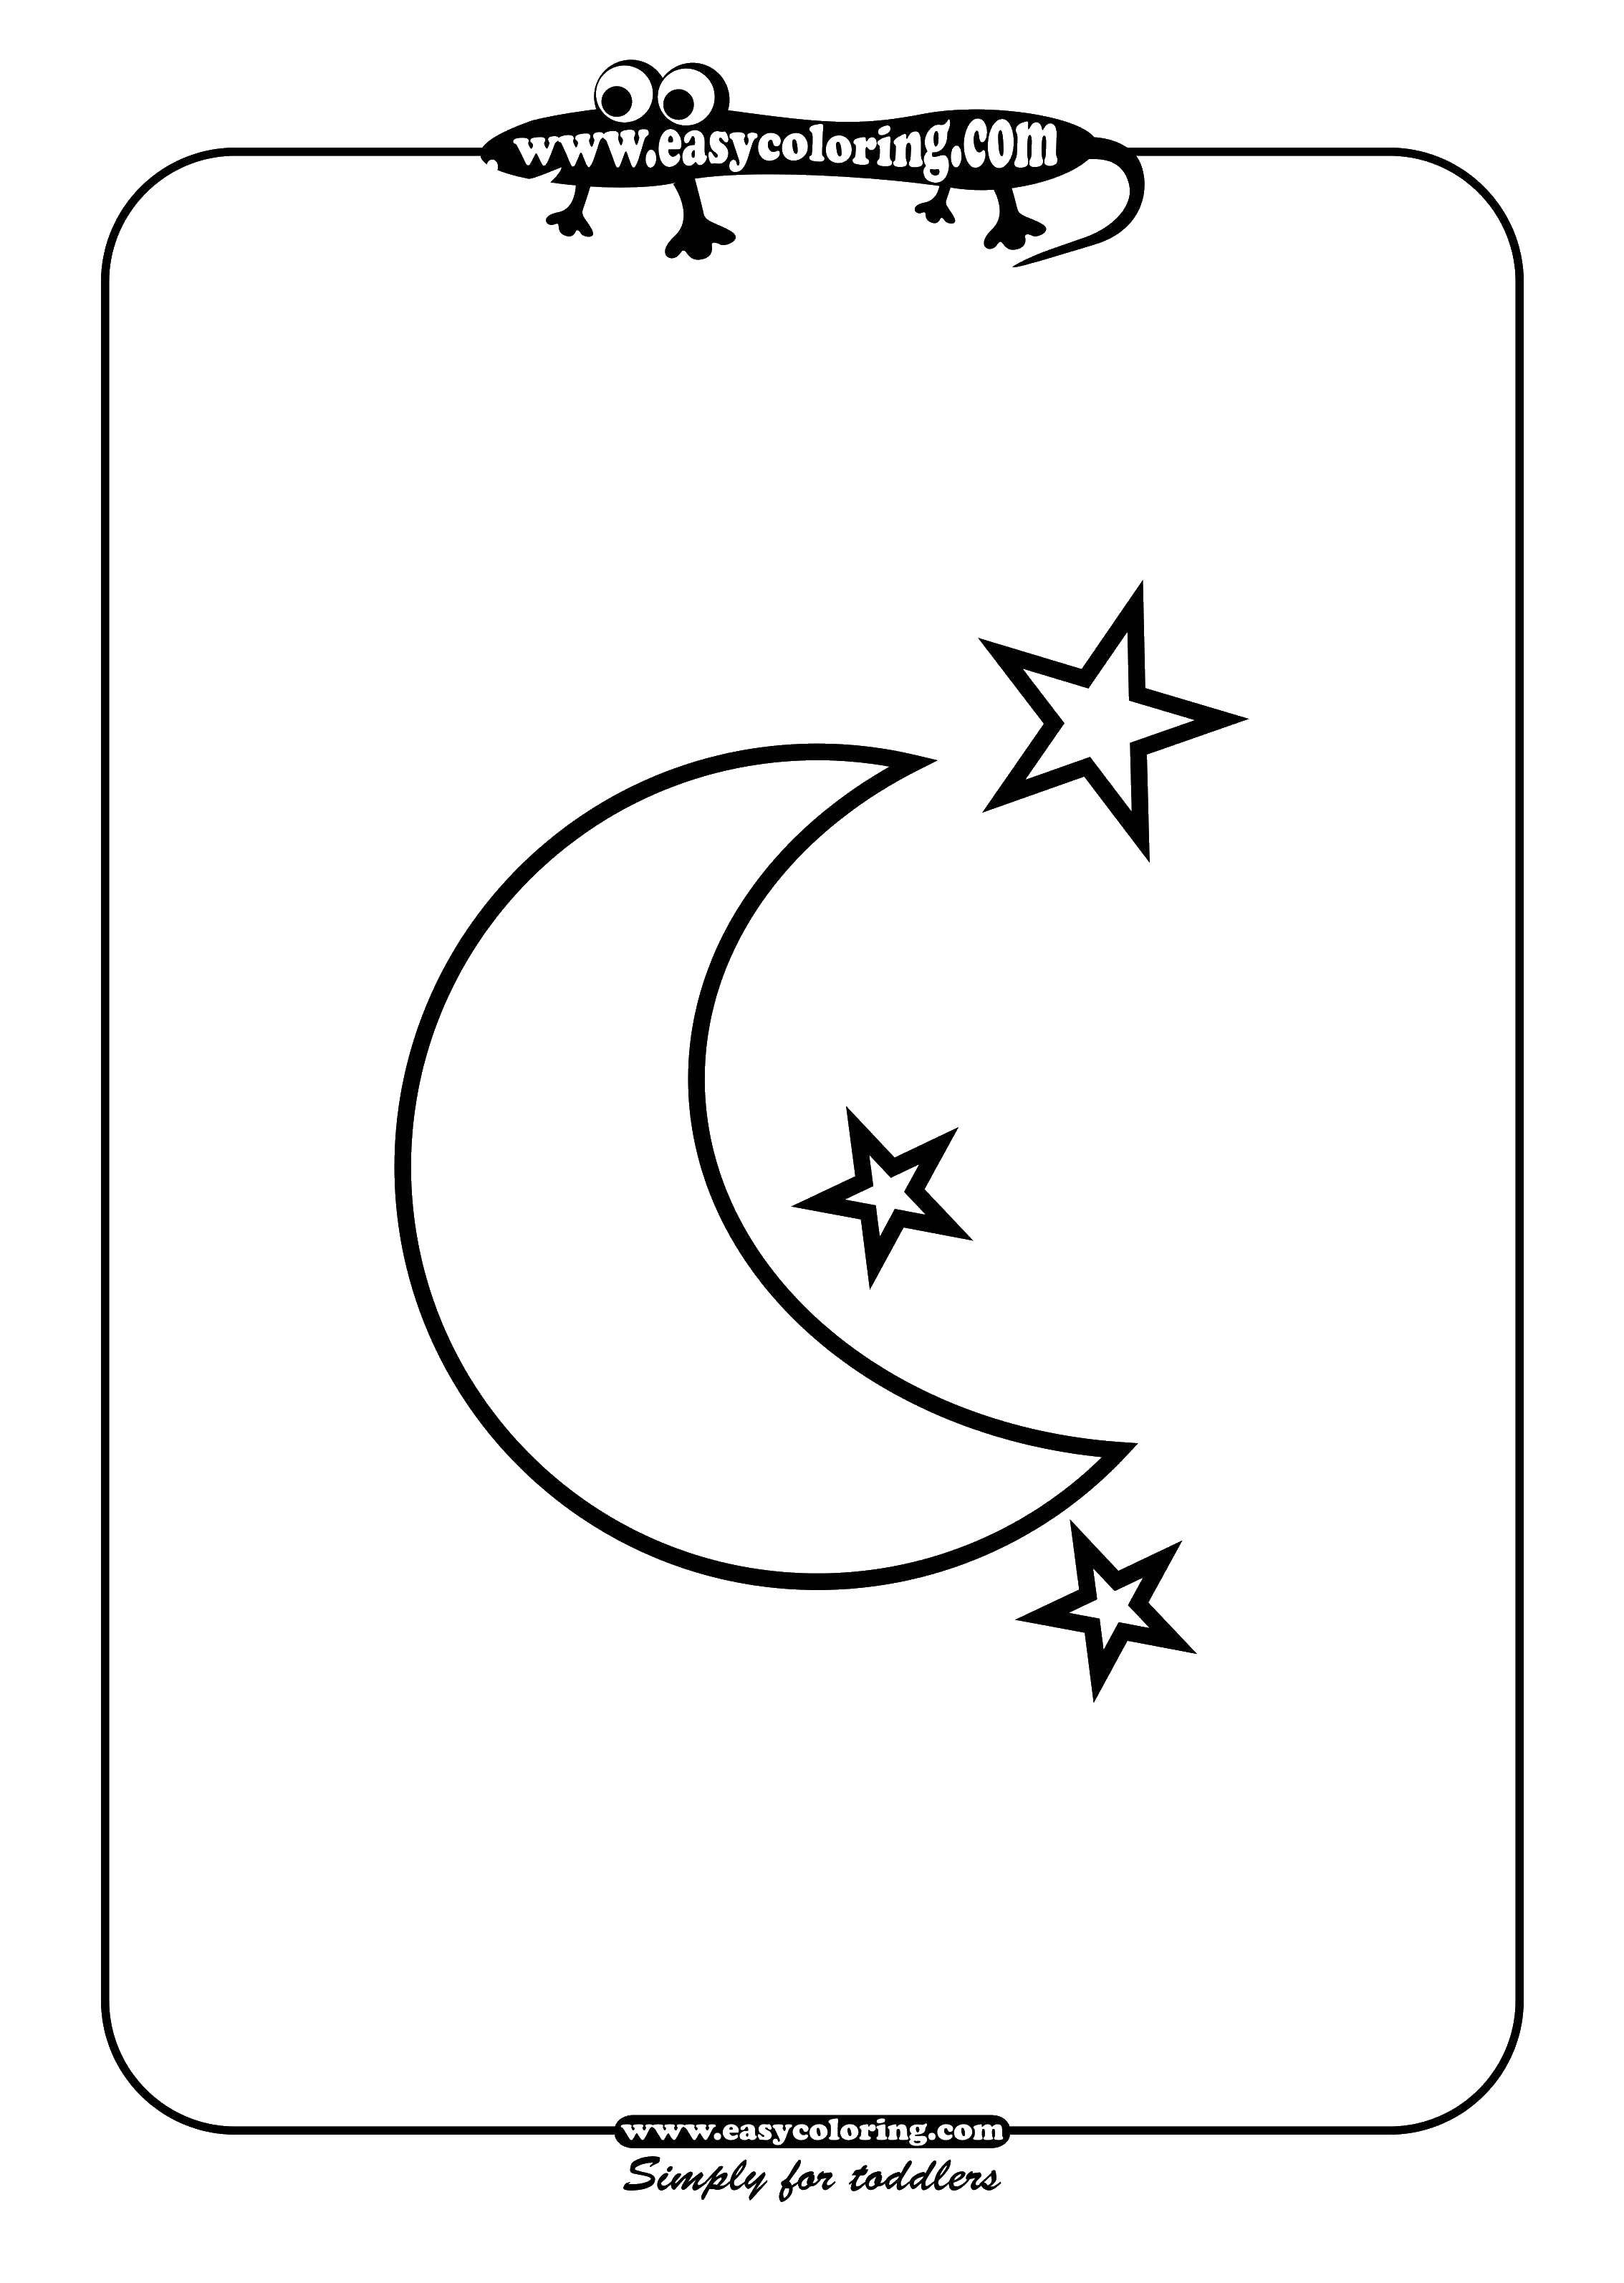 Coloring The Crescent moon and stars. Category The sky. Tags:  the sky, the Crescent, stars.